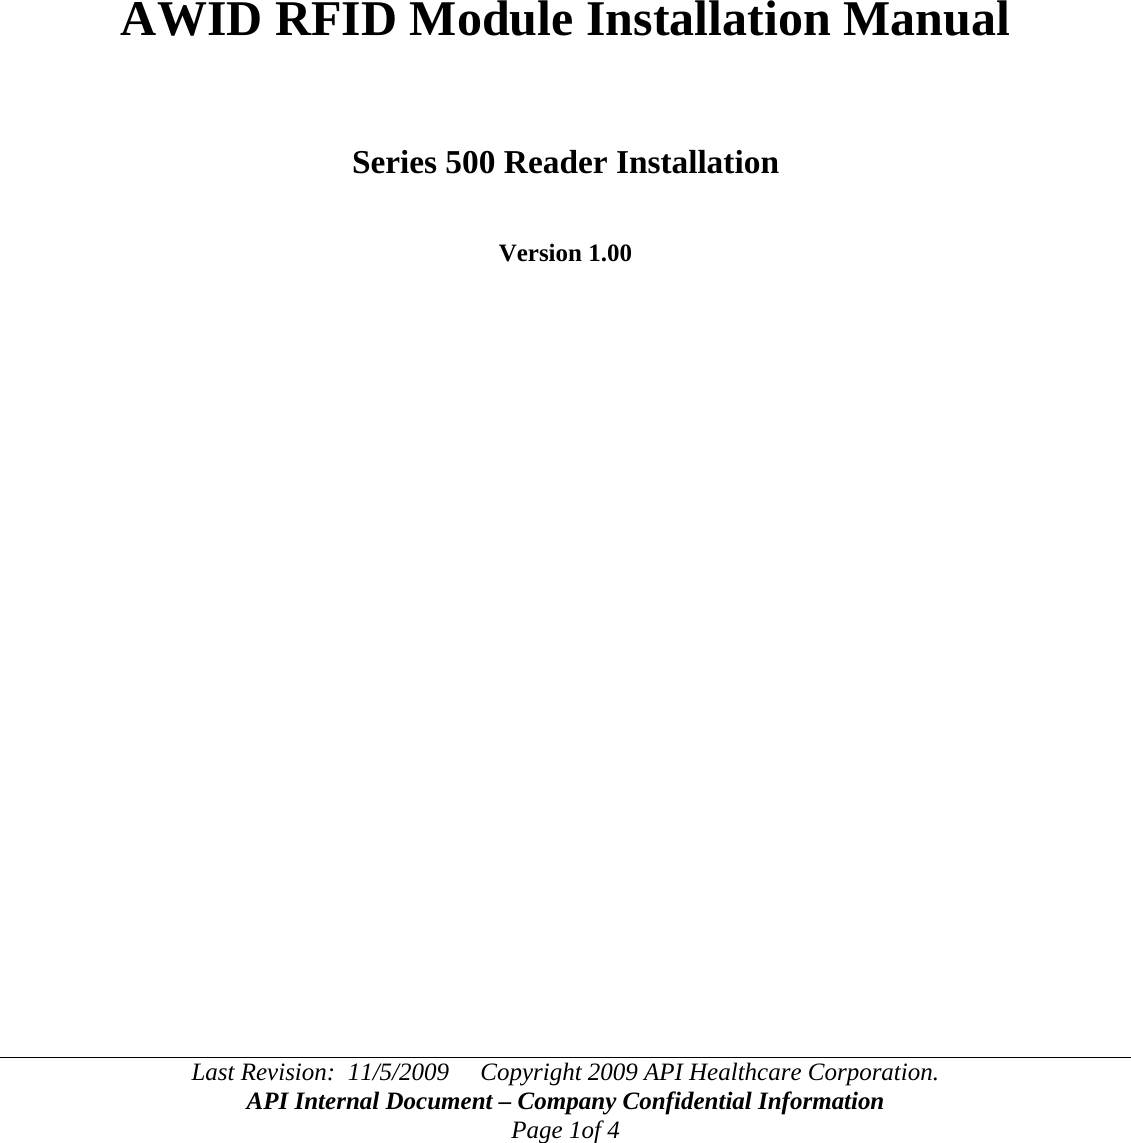 Last Revision:  11/5/2009     Copyright 2009 API Healthcare Corporation. API Internal Document – Company Confidential Information Page 1of 4       AWID RFID Module Installation Manual    Series 500 Reader Installation   Version 1.00          